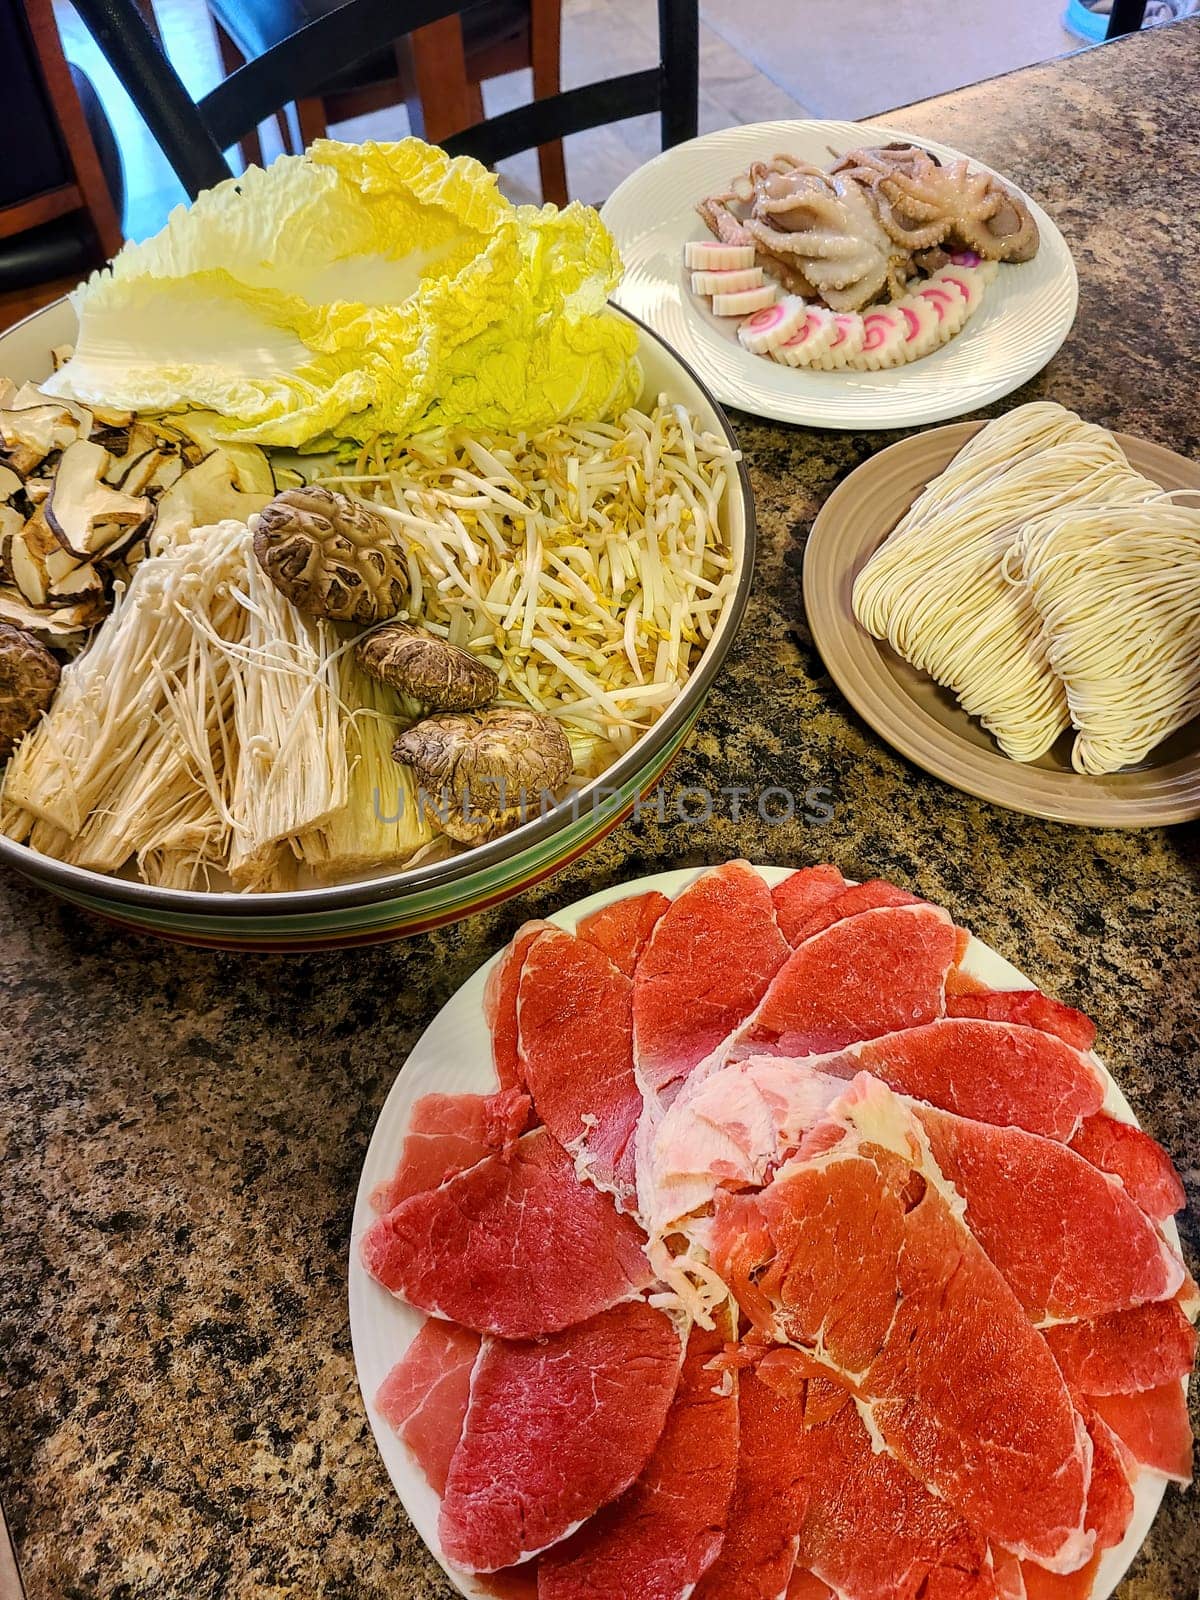 Fresh Hot Pot Ingredients Prepared for Home Cooking, Featuring Sliced Beef, Vegetables, and Seafood, Indiana, 2022